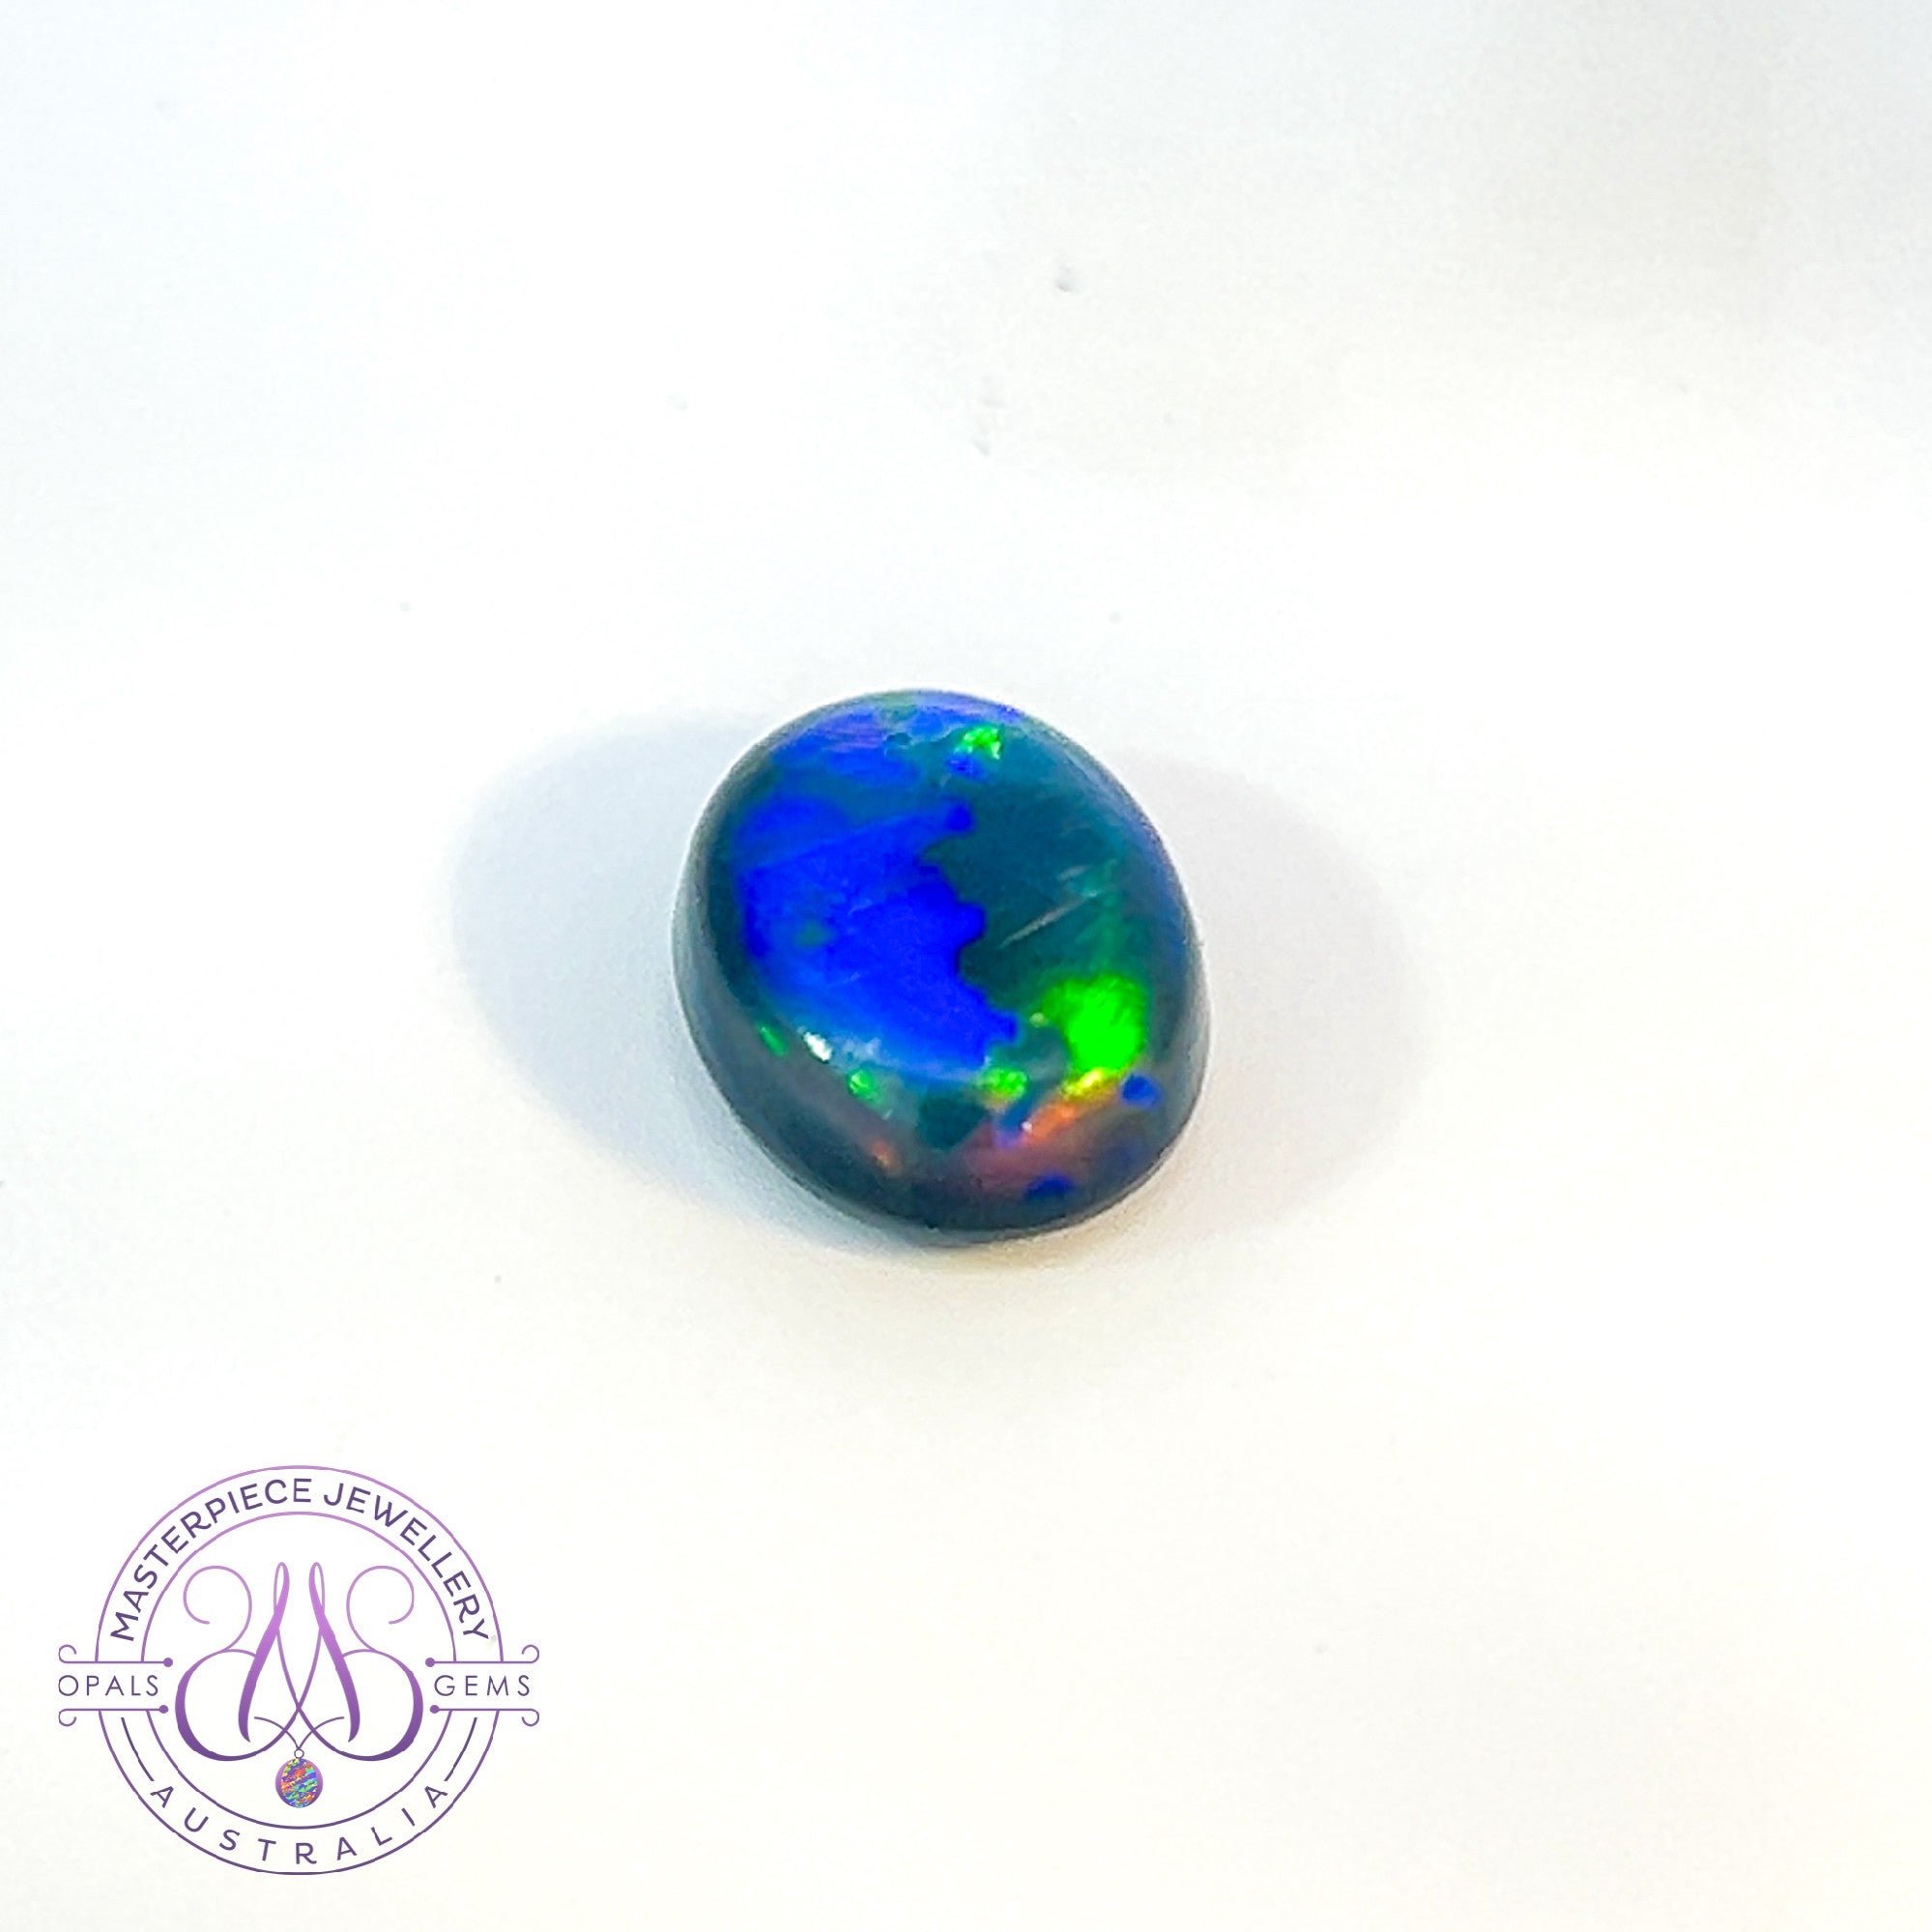 One loose Black opal 2.78ct oval